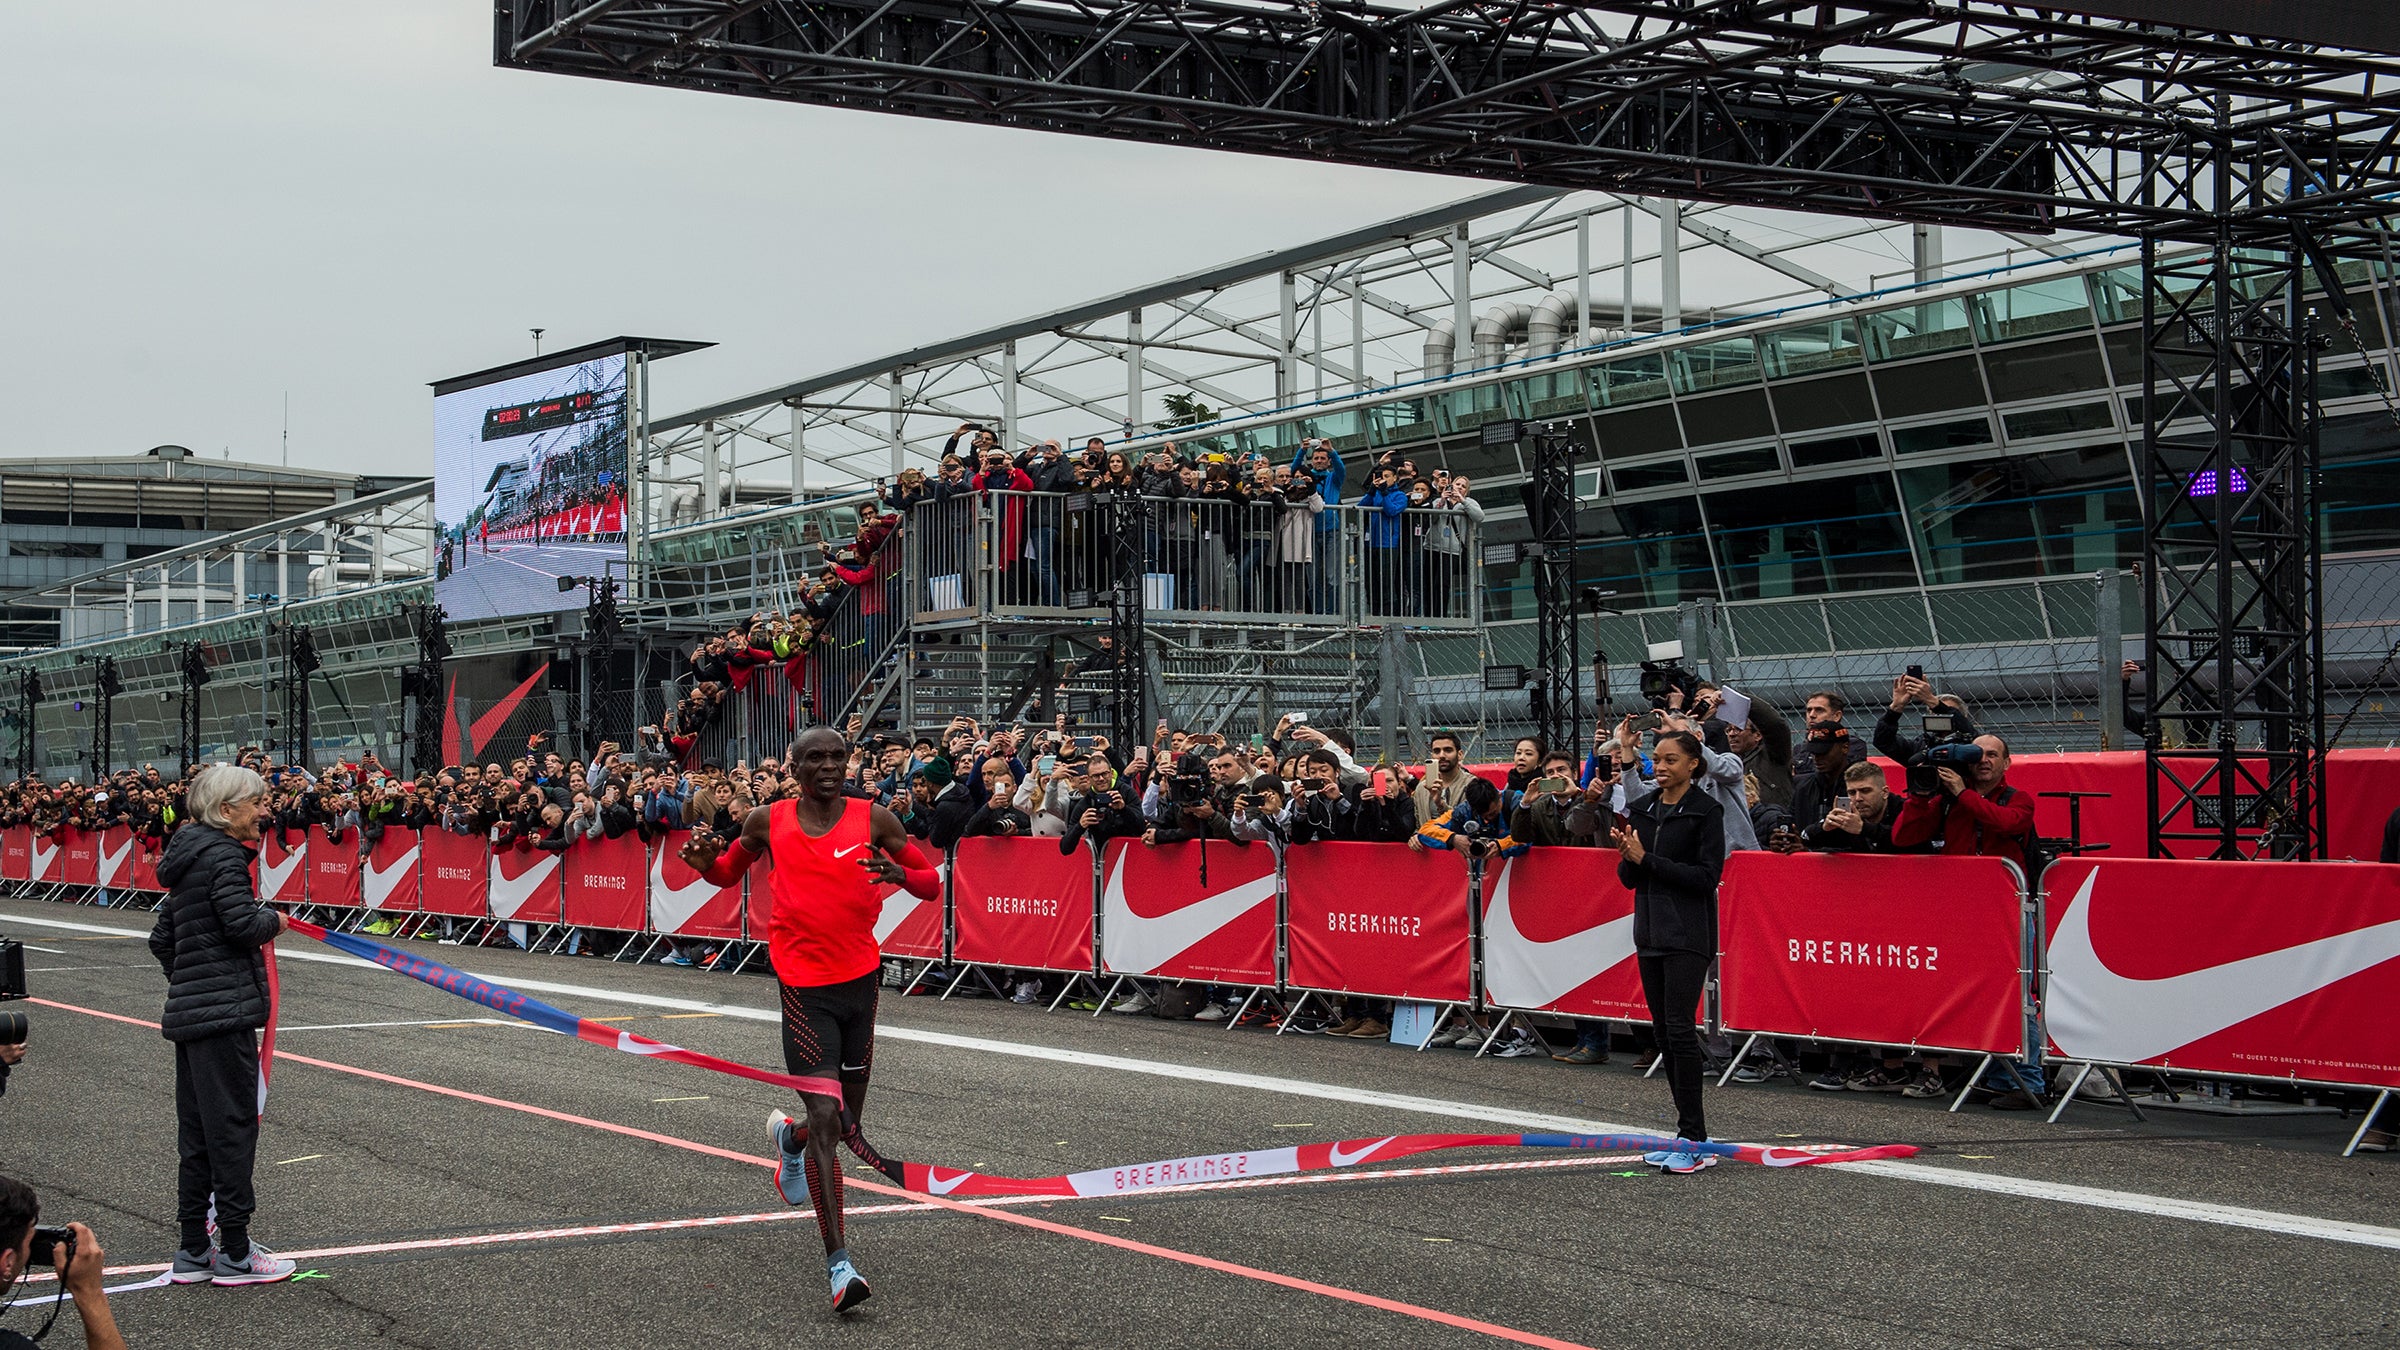 solidaridad Moretón whisky We Now Have the Lab Data on Nike's Breaking2 Runners